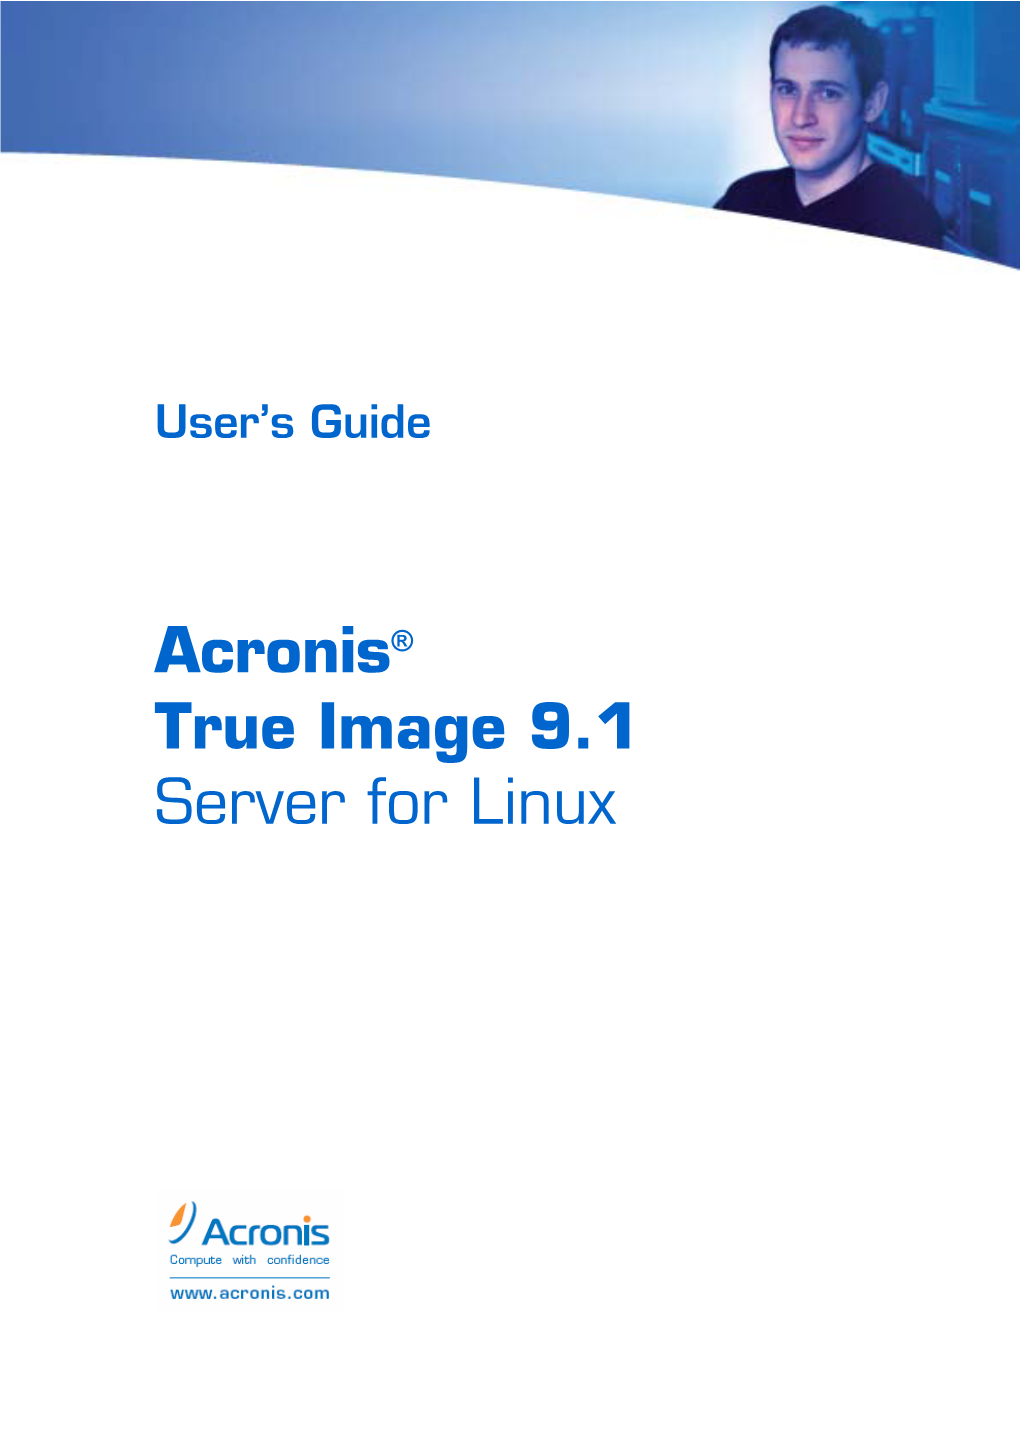 Acronis True Image Server for Linux User Guide